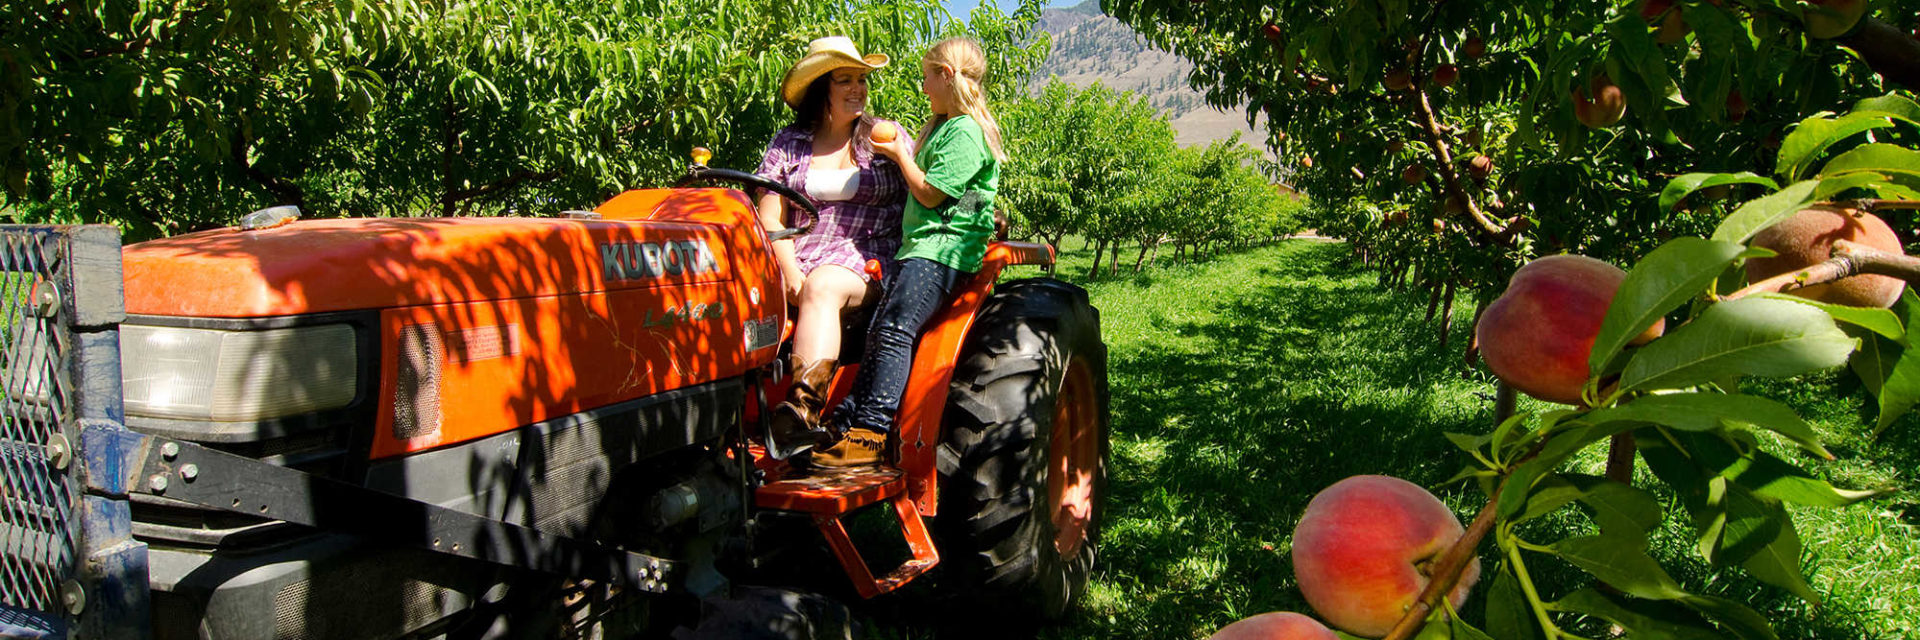 Fruit Stands and Orchards - Similkameen Valley